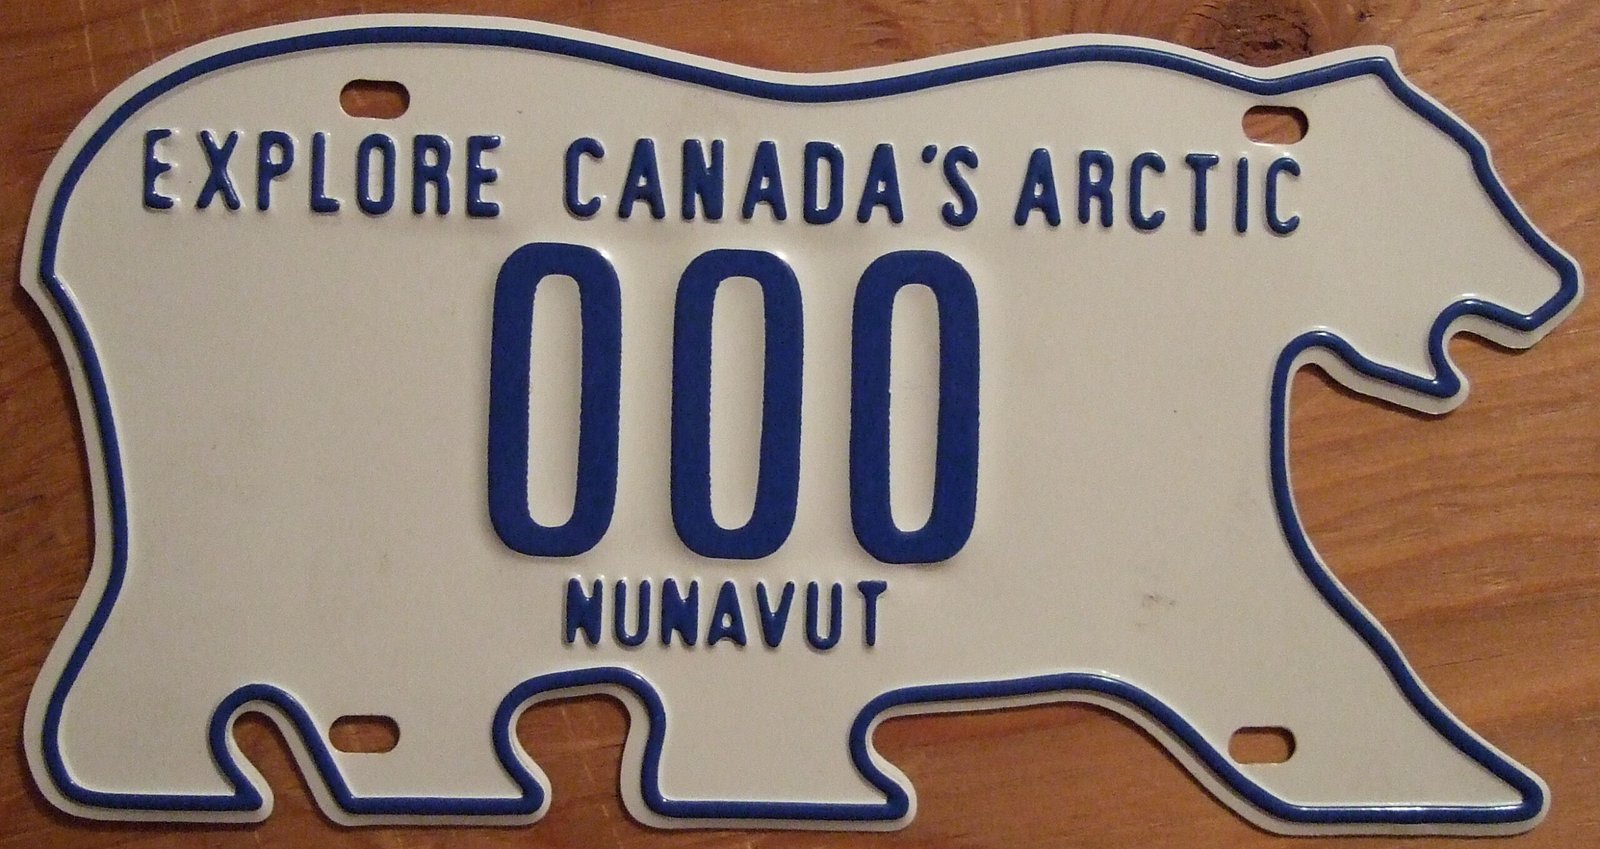 Canadian Northwest Territories License plates are shaped like polar bears.